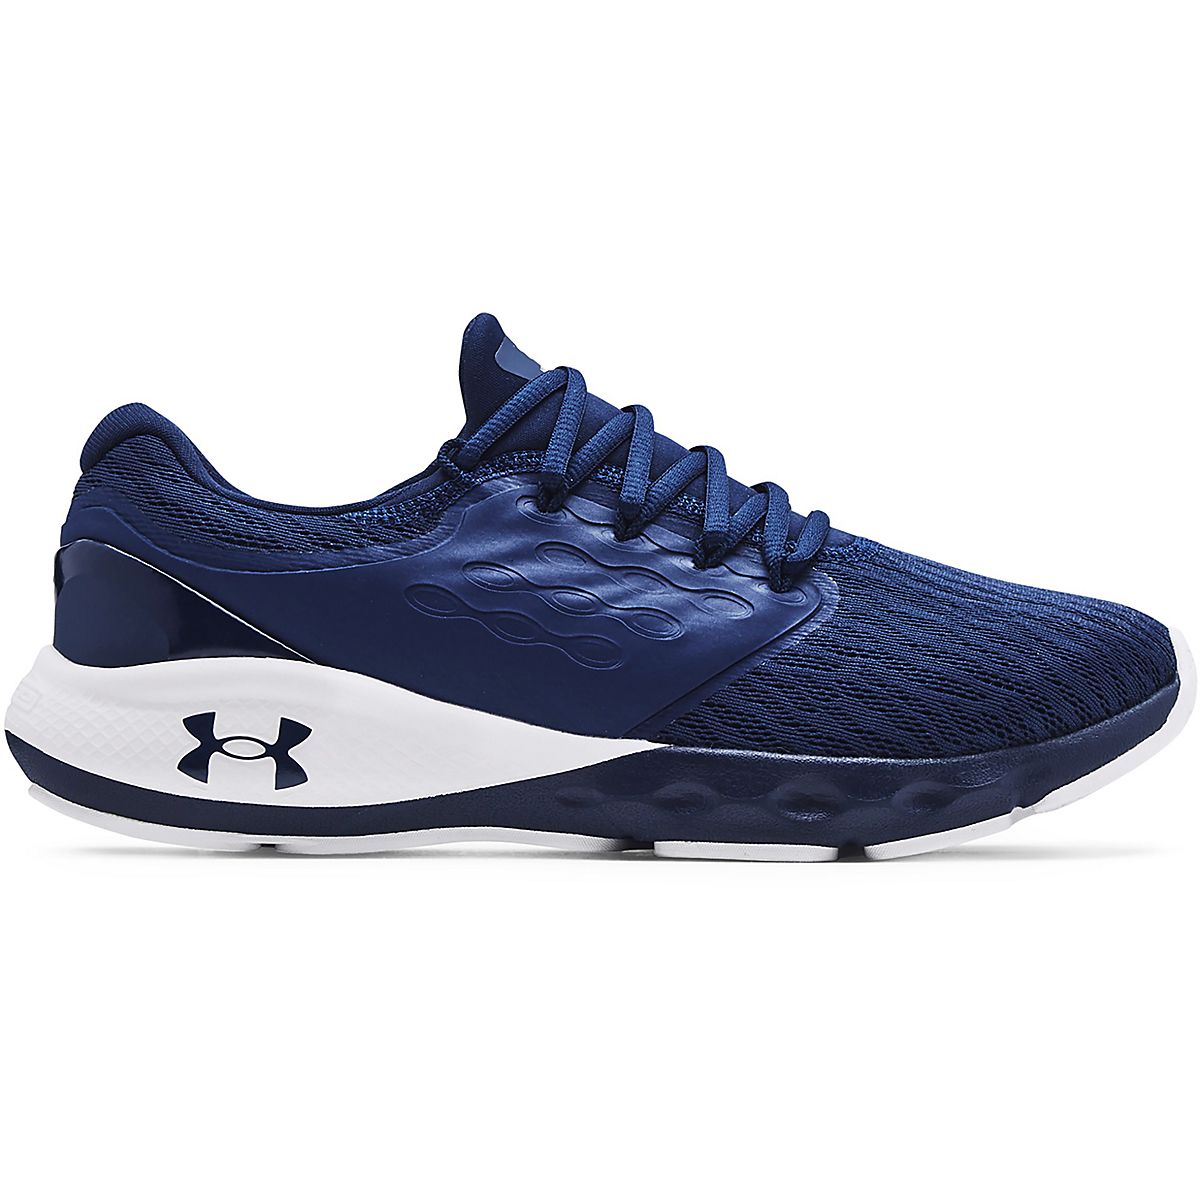 Under Armour Men's HOVR Charged Vantage Running Shoes | Academy